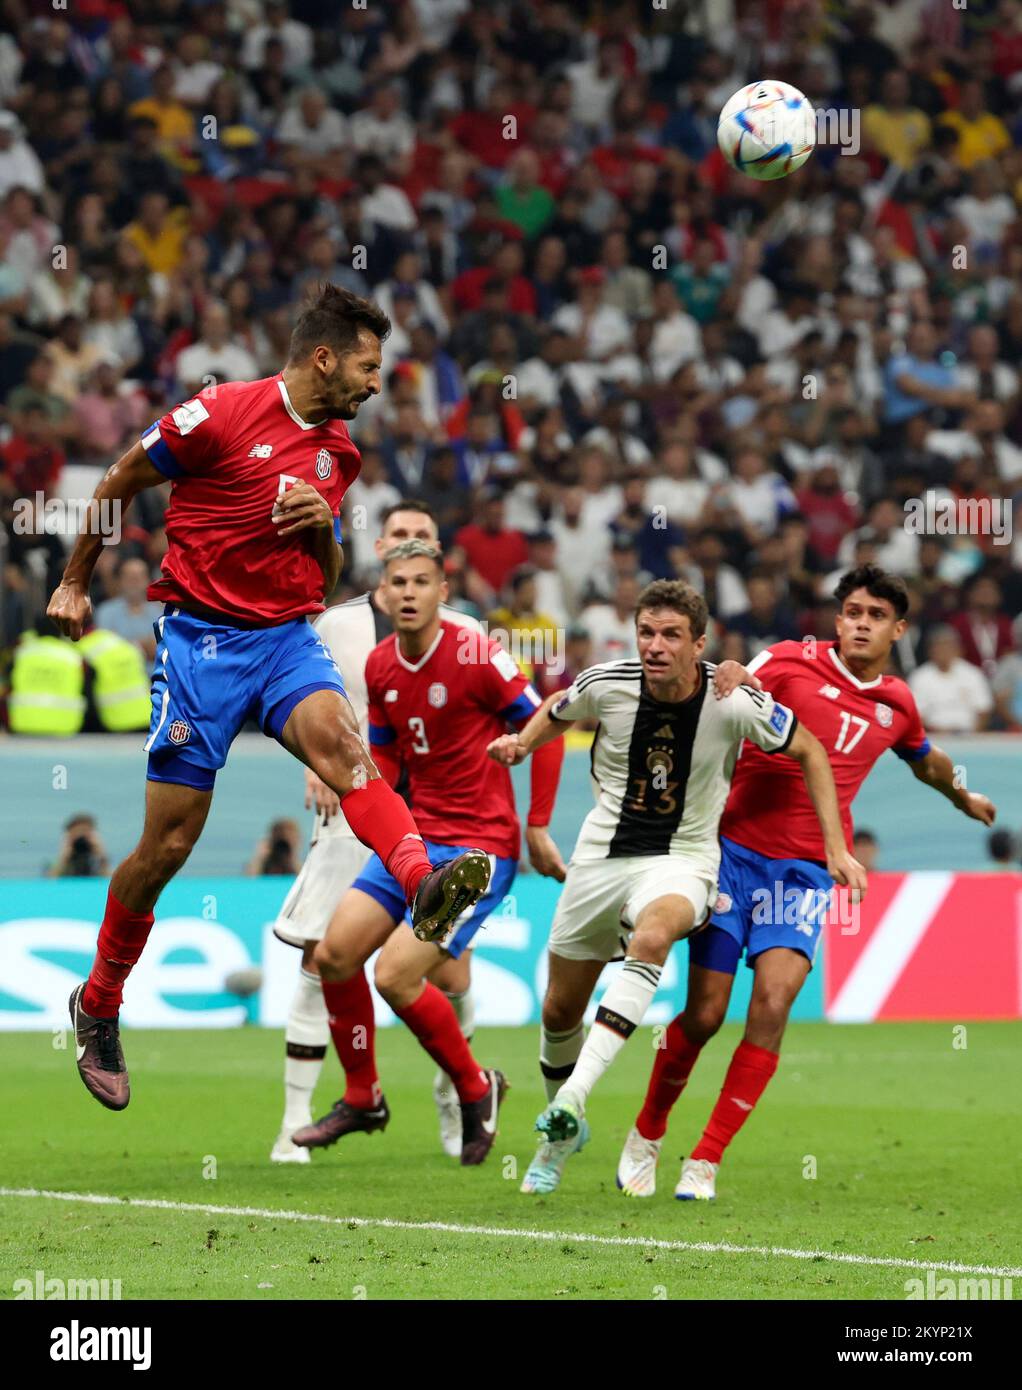 Al Khor, Qatar. 1st Dec, 2022. Celso Borges of Costa Rica heads the ball during the Group E match between Costa Rica and Germany at the 2022 FIFA World Cup at Al Bayt Stadium in Al Khor, Qatar, Dec. 1, 2022. Credit: Han Yan/Xinhua/Alamy Live News Stock Photo